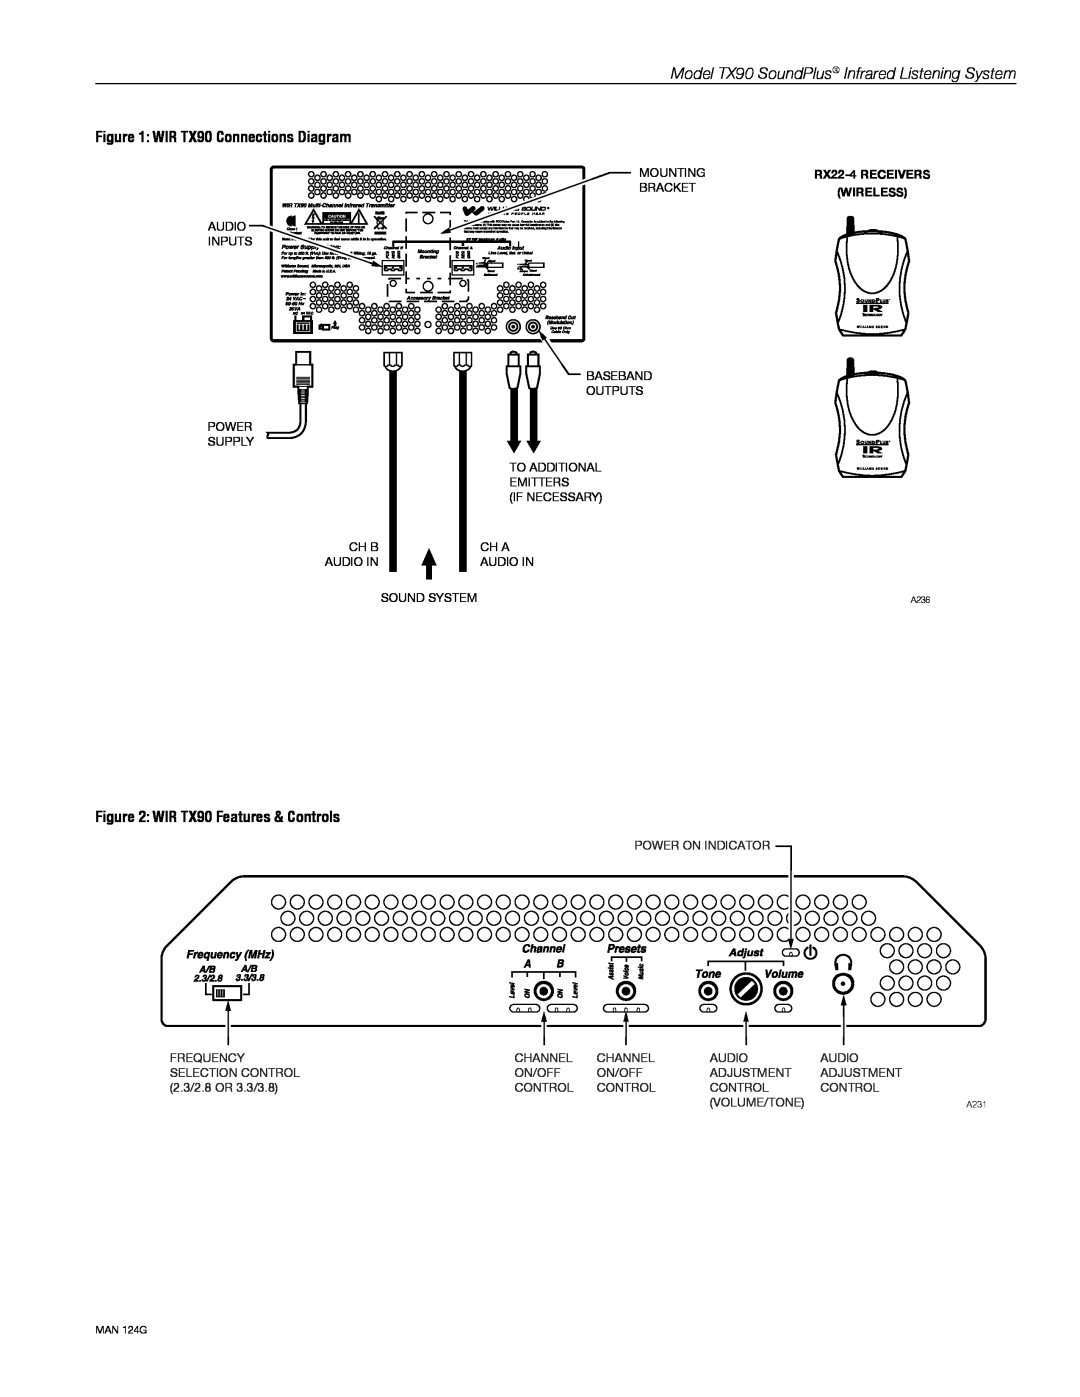 Williams Sound WIR TX90 WIR TX90 Connections Diagram, WIR TX90 Features & Controls, Mounting, RX22-4RECEIVERS, Bracket 